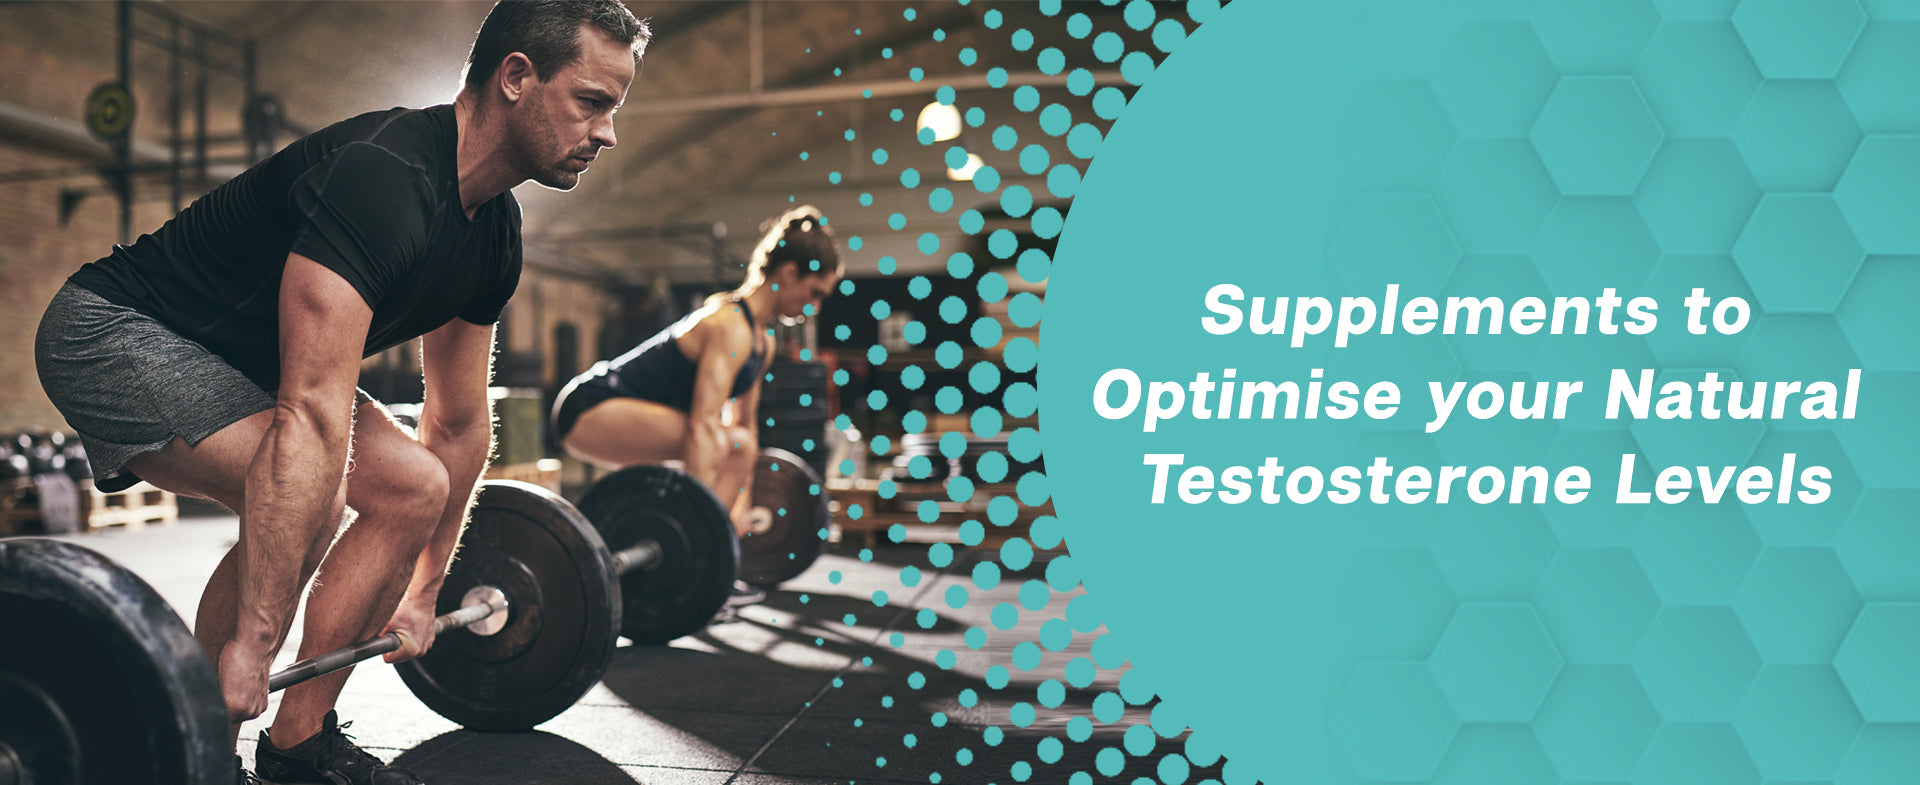 Supplements To Optimise Your Natural Testosterone Levels